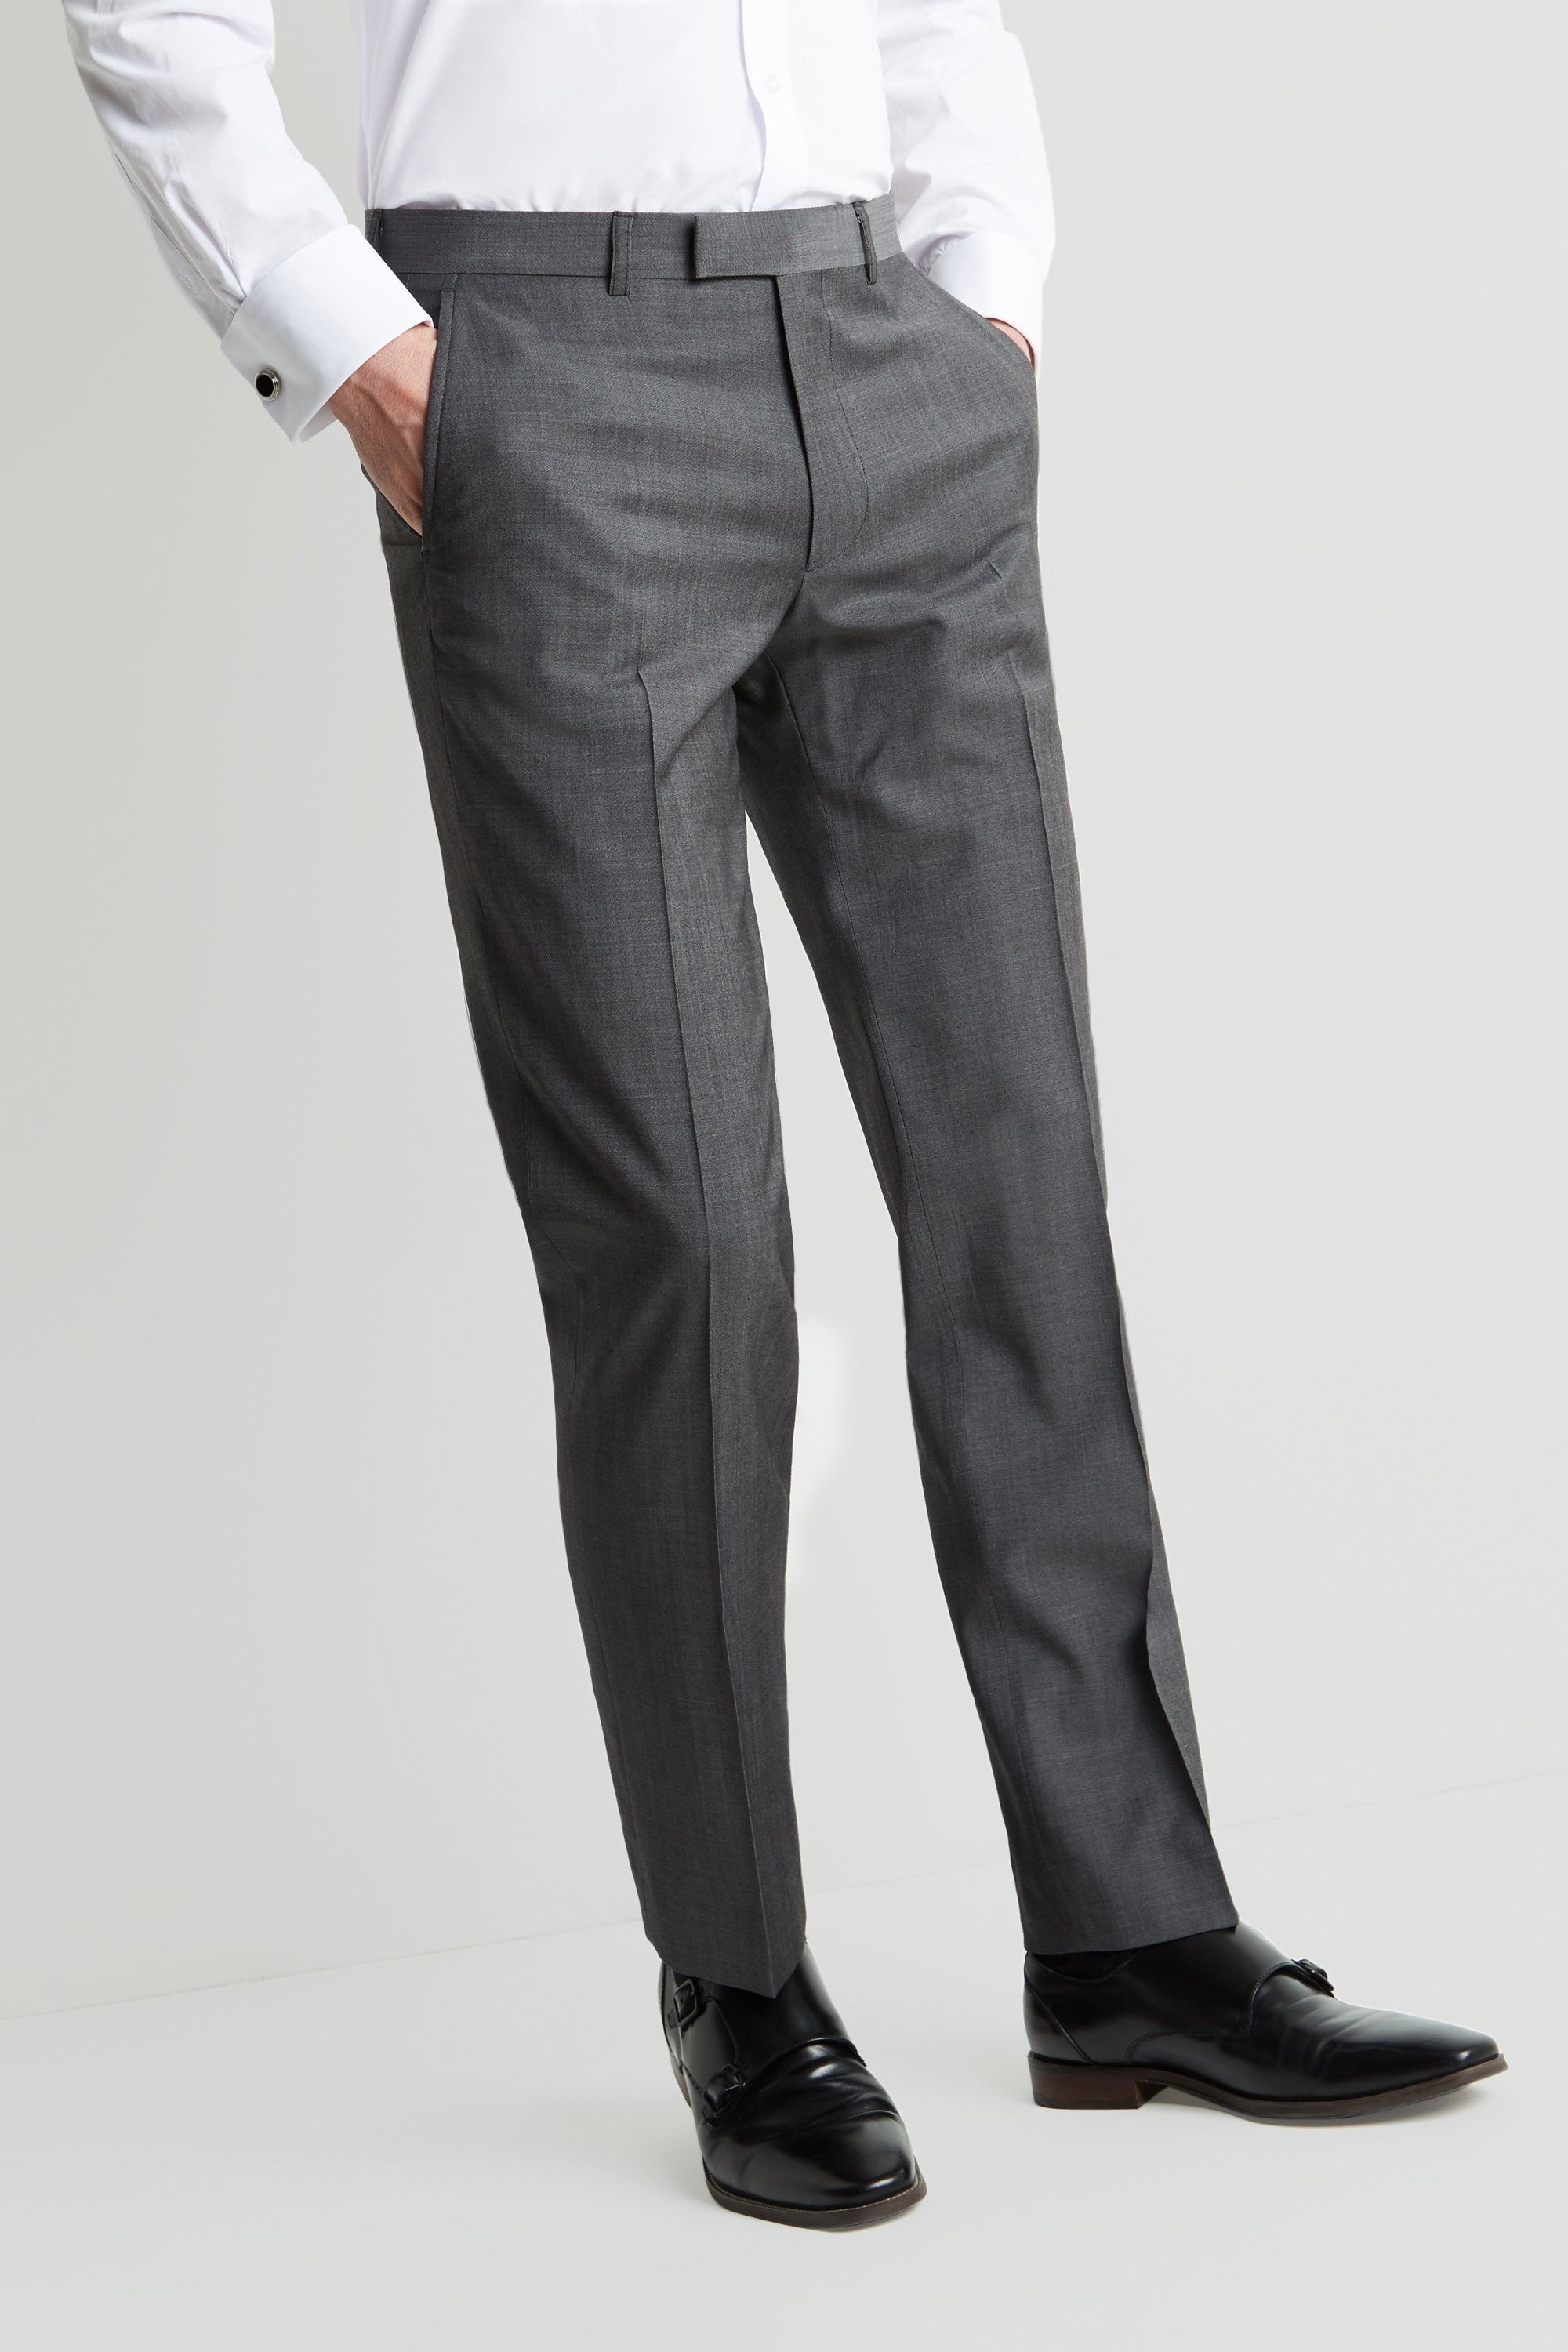 Moss 1851 Grey Lounge Hire Suit | Moss Hire